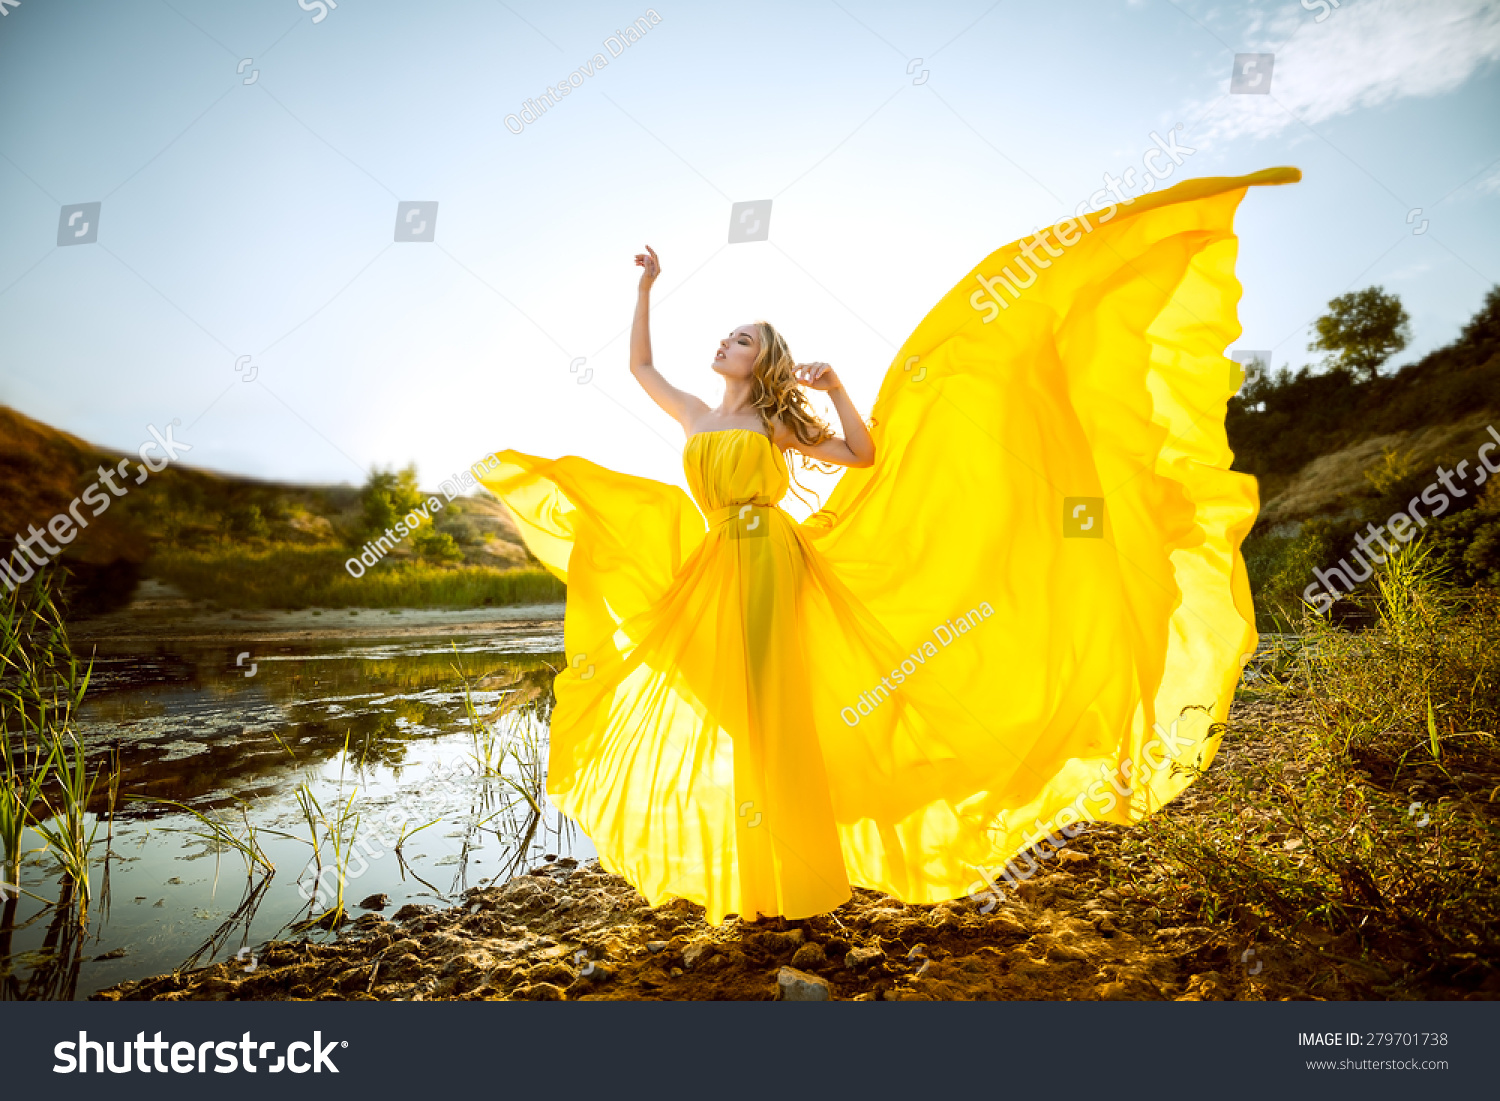 the beautiful girl with long hair in the yellow fluttering dress costs on the bank of a stream, hands raised up, having closed eyes #279701738